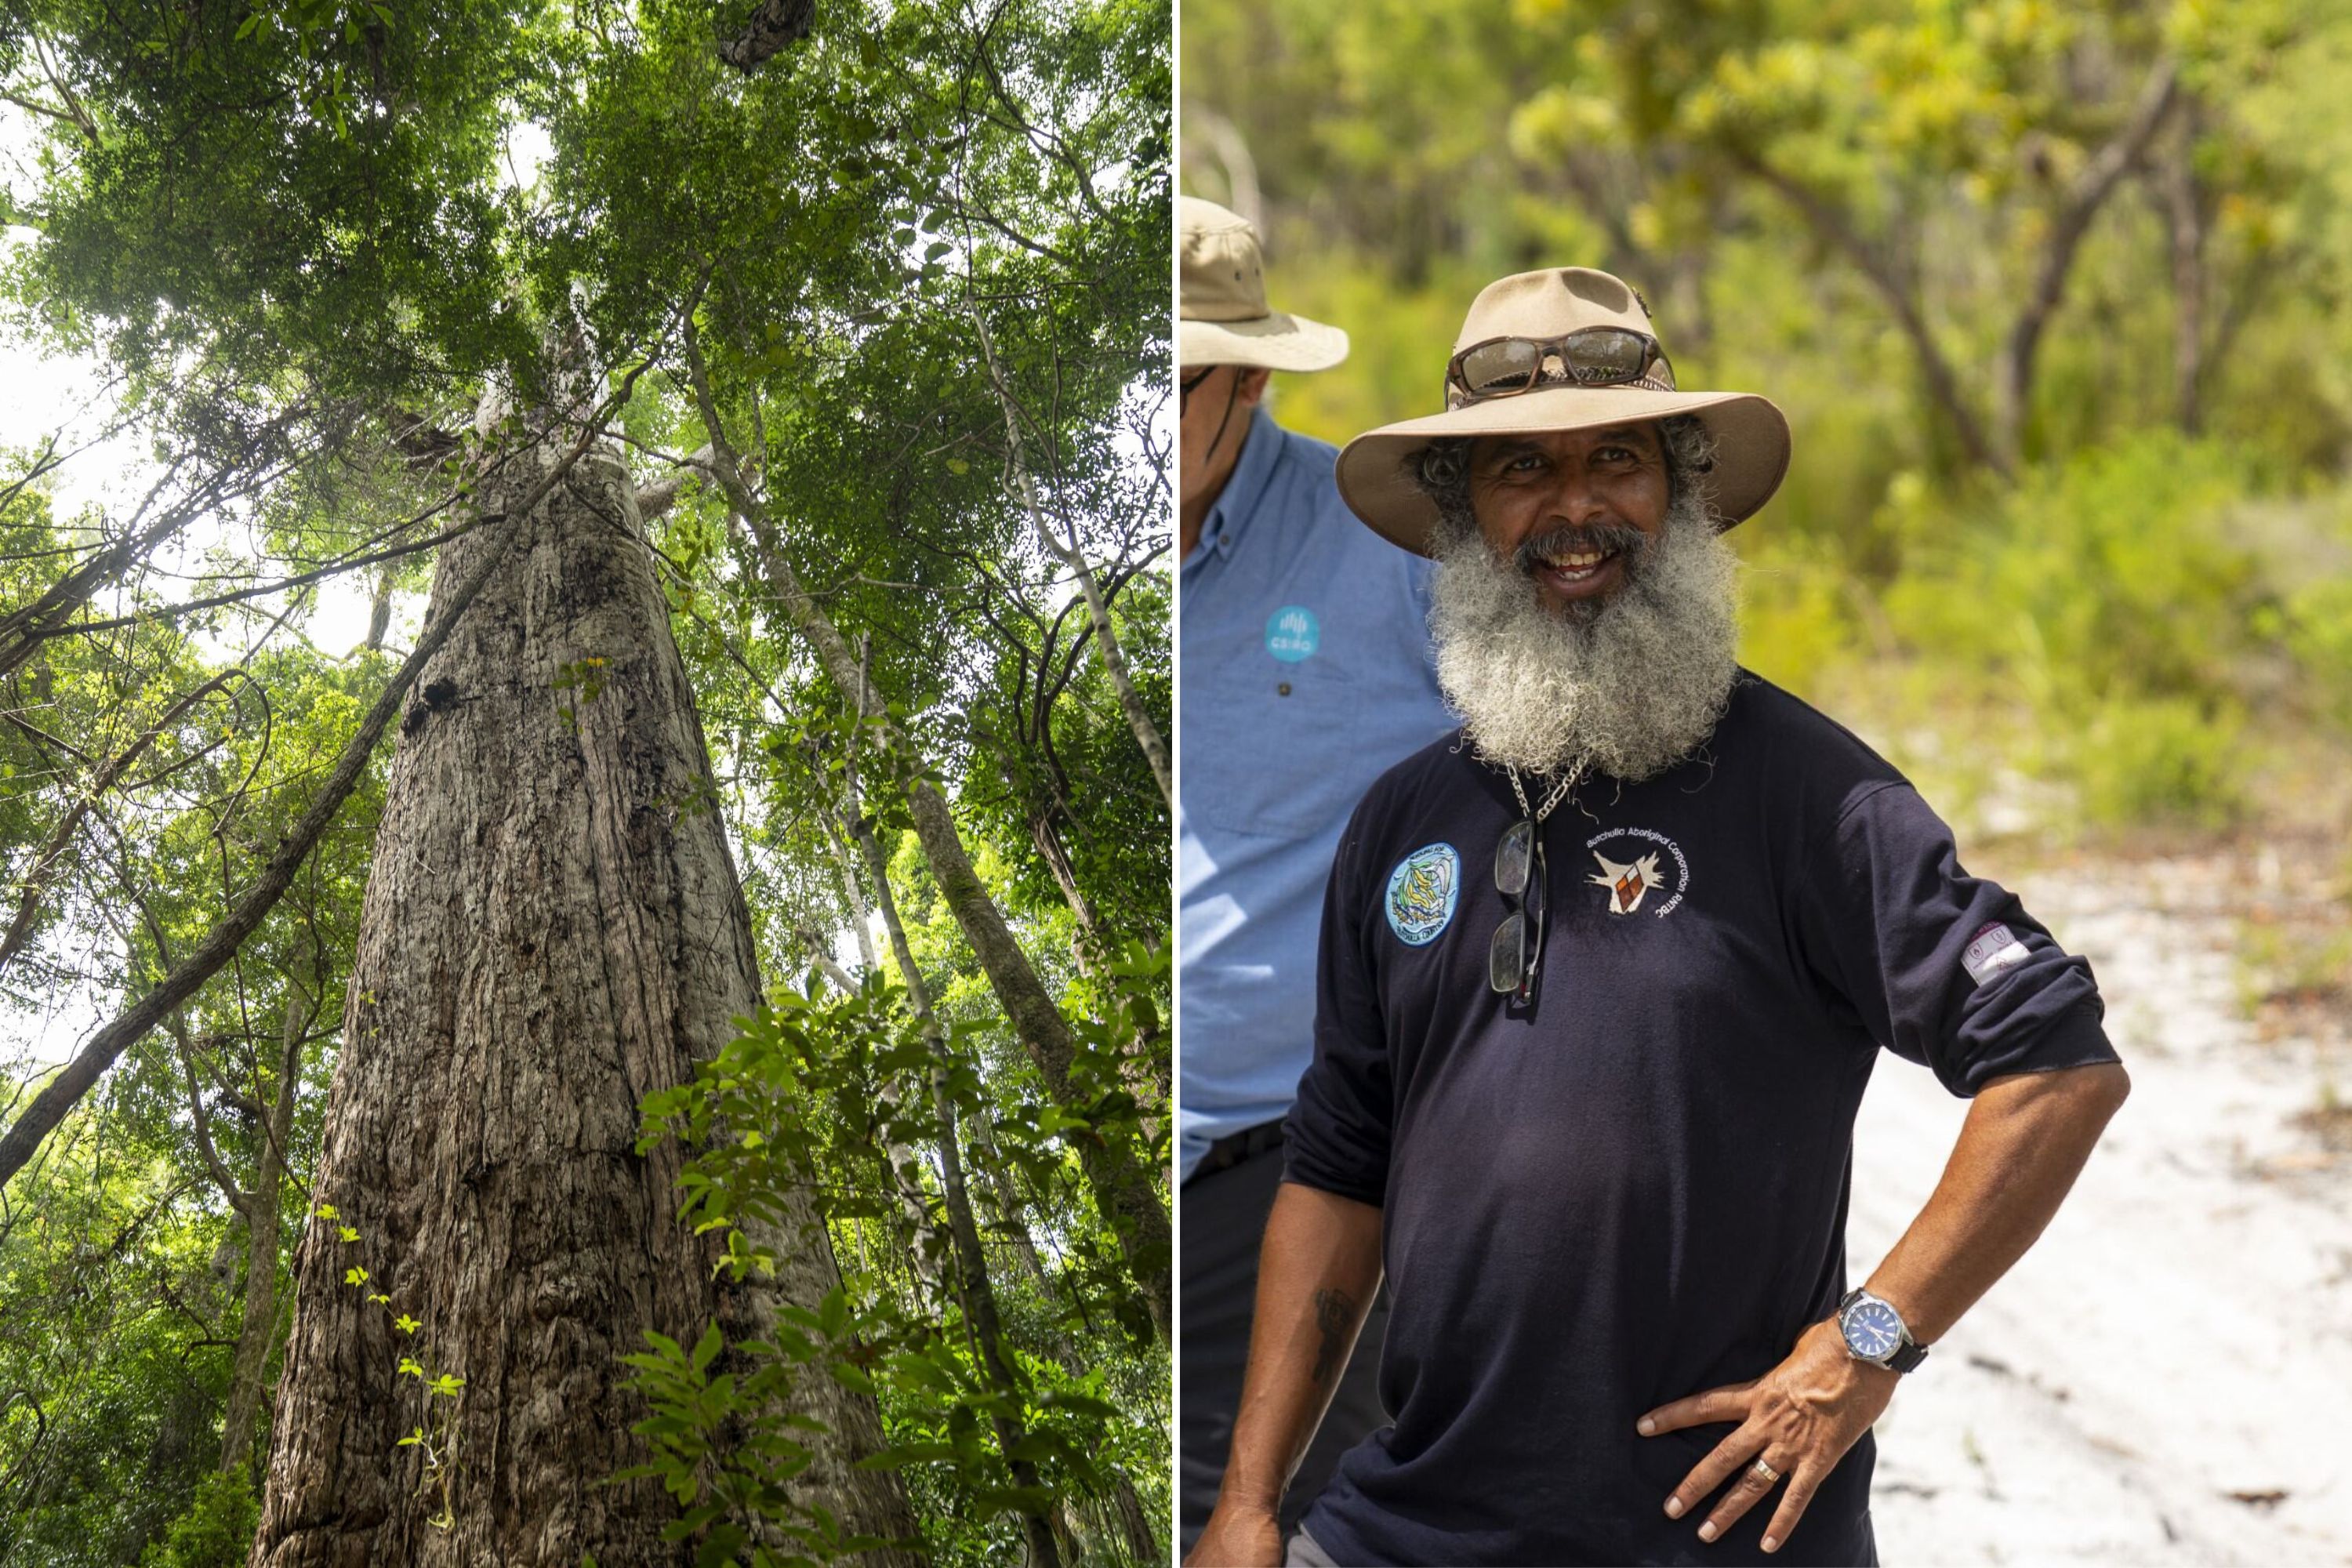 A collage of two photos showing a large tree and a man smiling